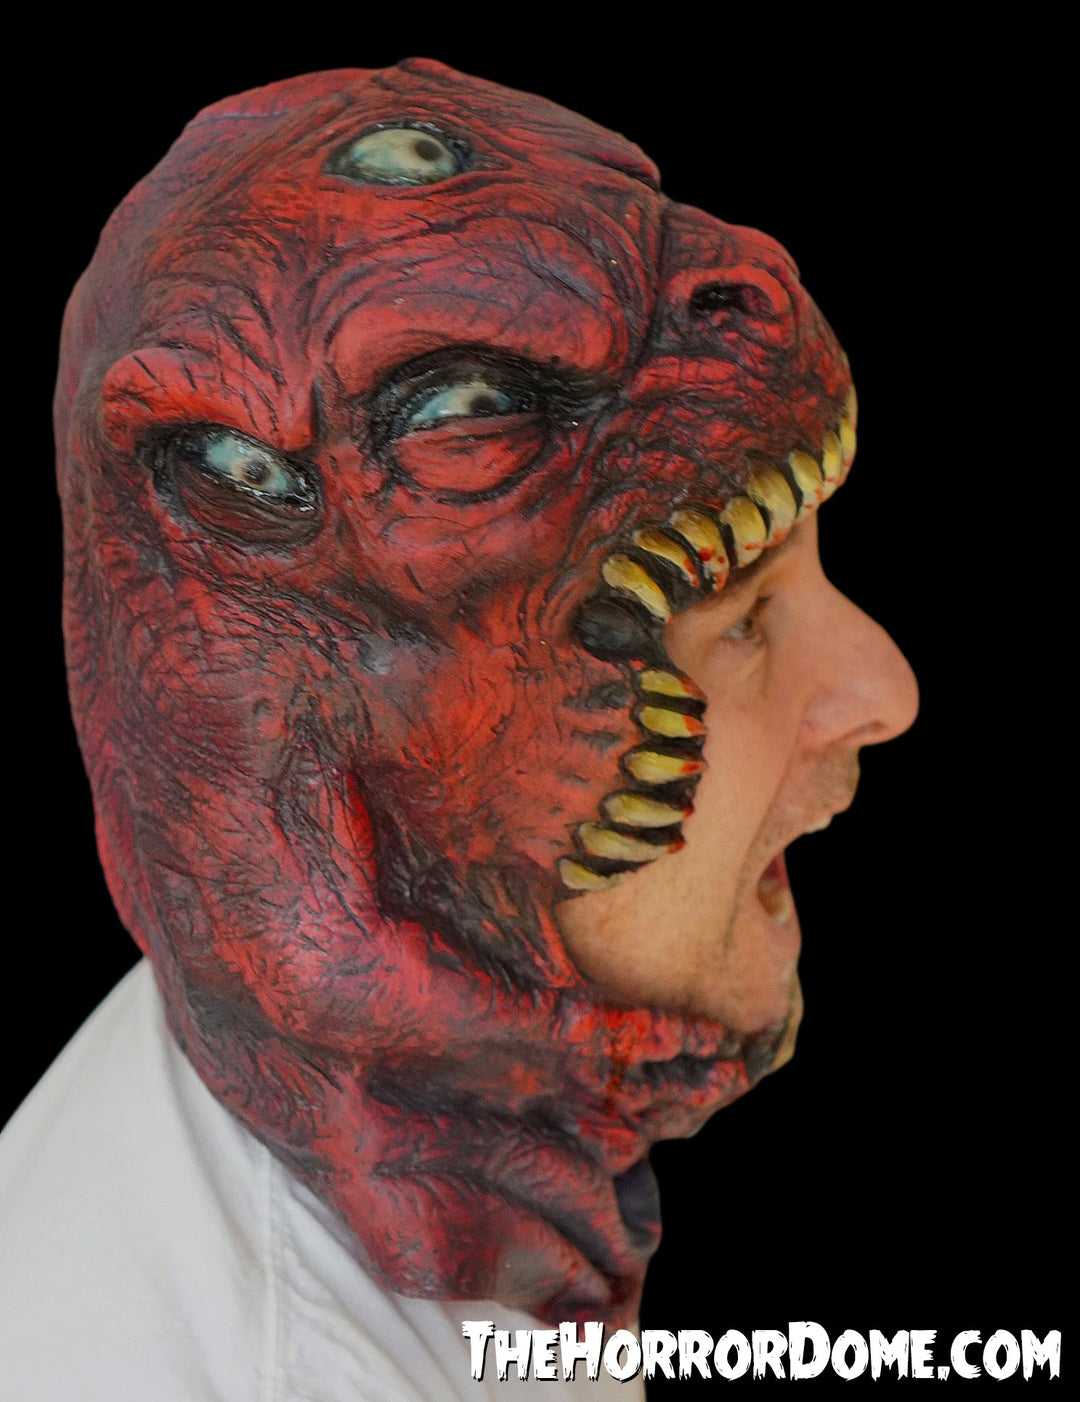 Hand-Painted Movie Quality Halloween Mask - The Head Chomper